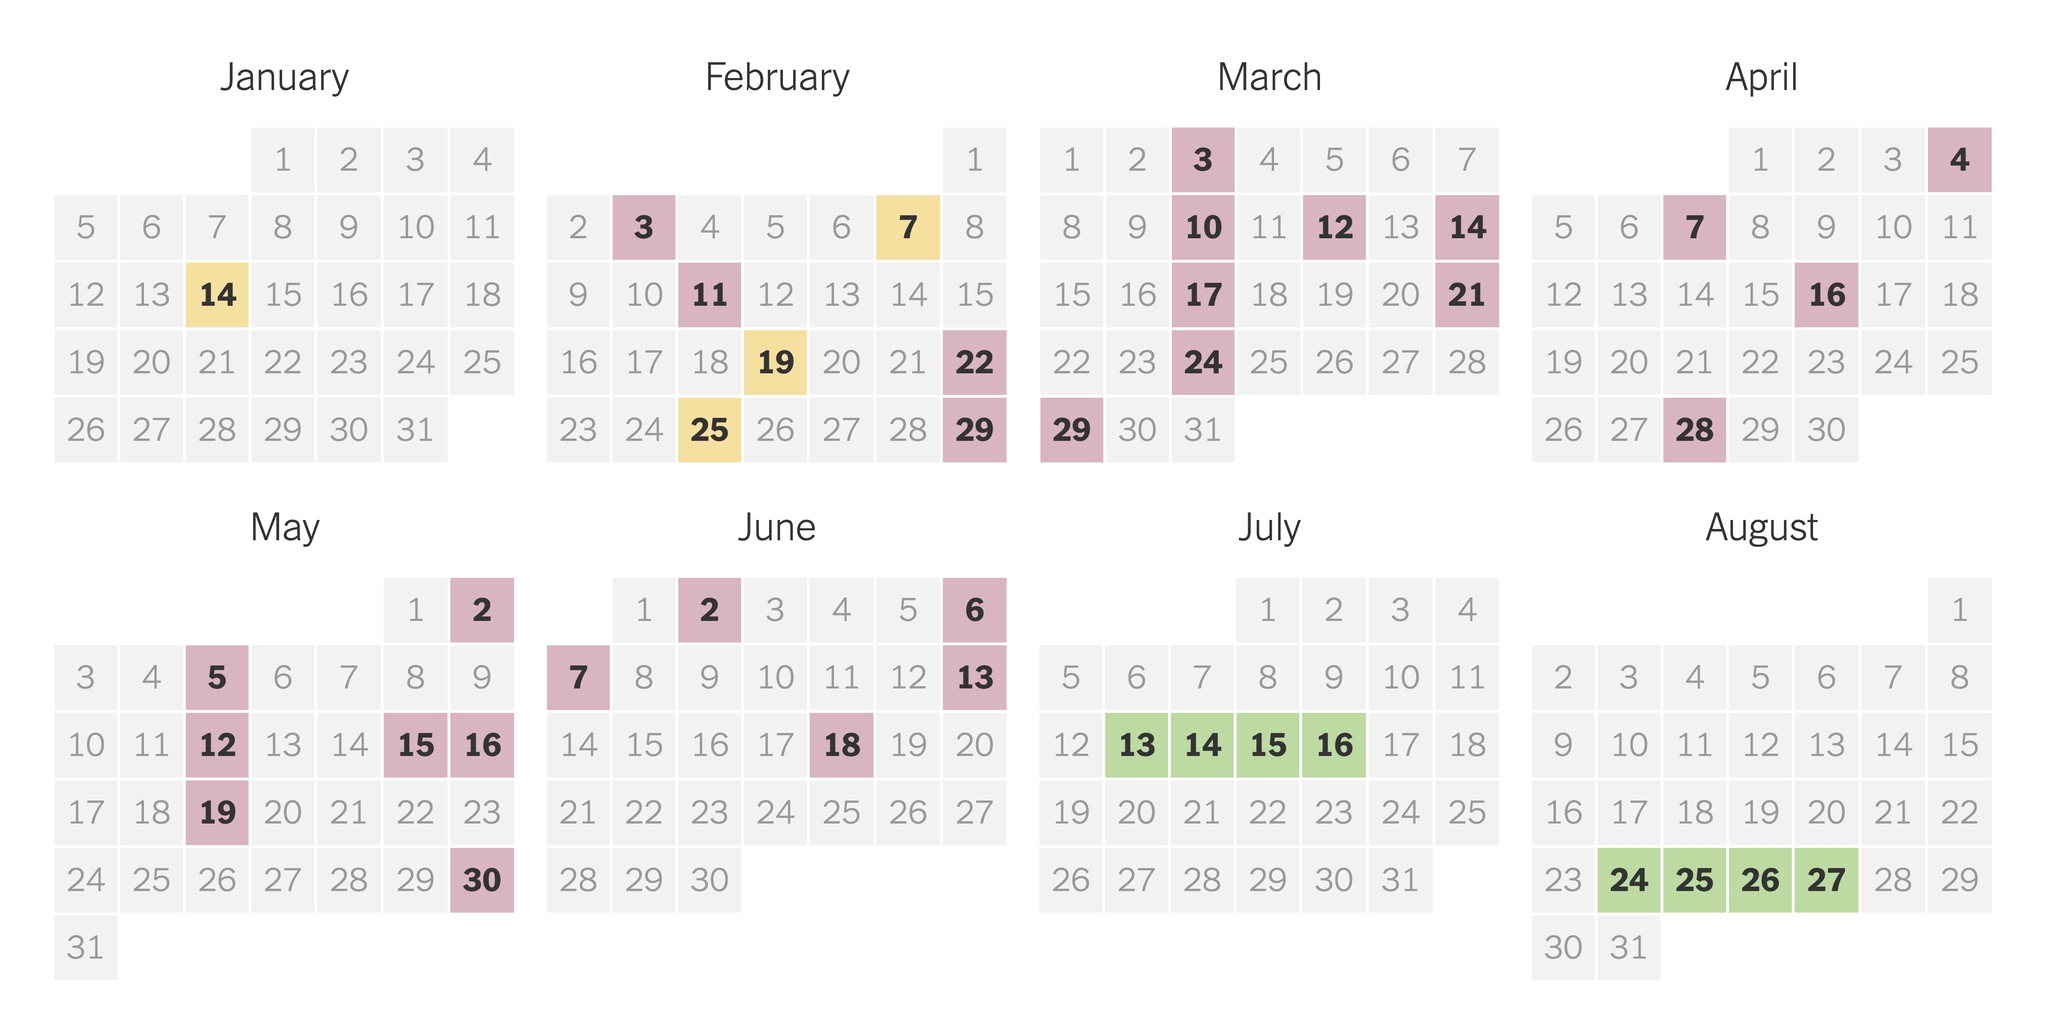 2020 Presidential Primary Election Calendar - The New York Times